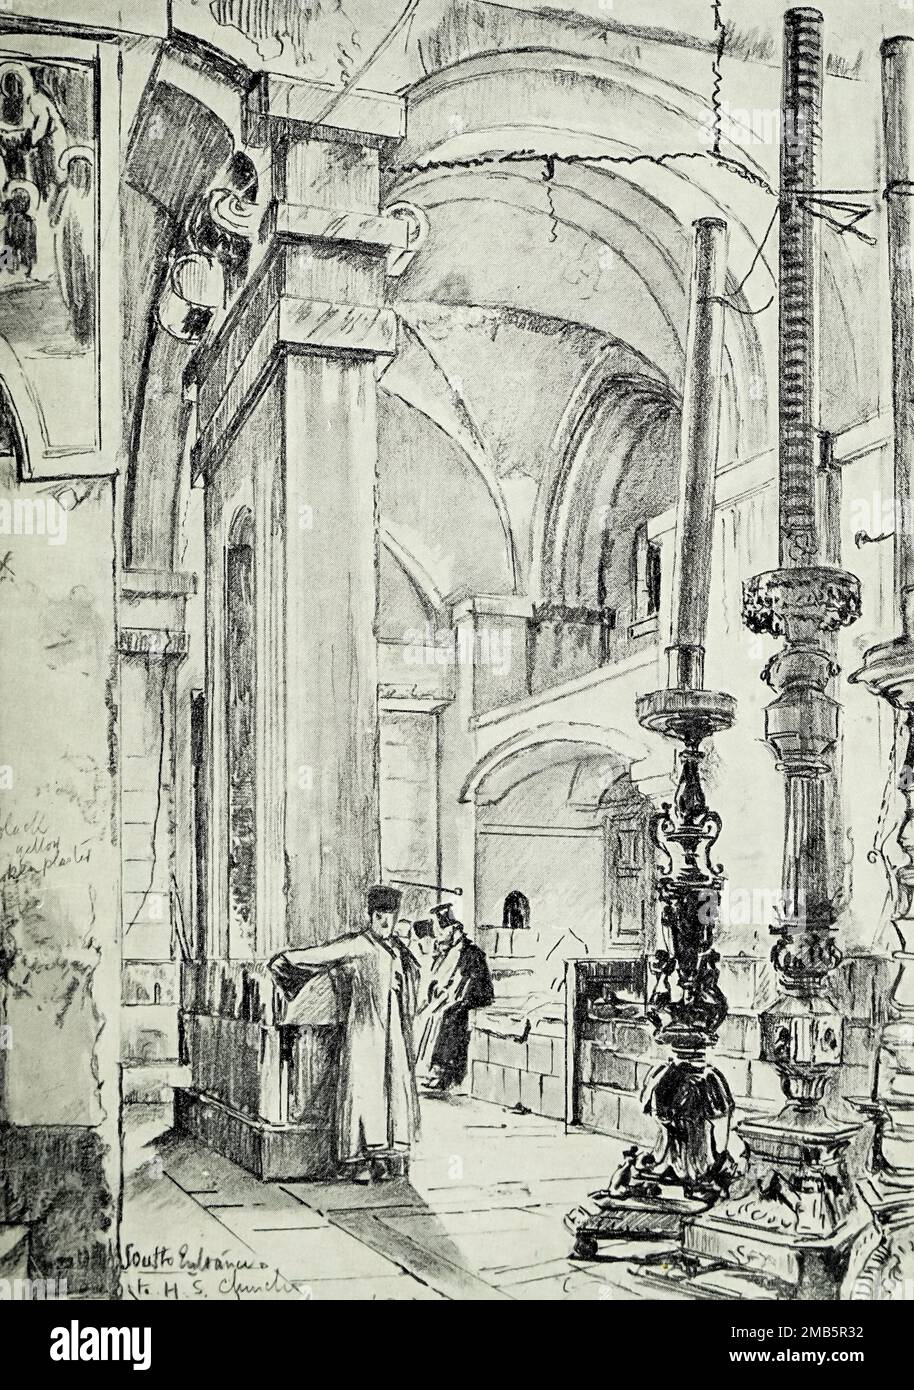 The Vestibule of the Church of the Holy Sepulchre sketch by John Fulleylove from the book ' The Holy land ' Described by John Kelman 1864-1929 Publication date 1902 Publisher London : A. & C. Black Stock Photo